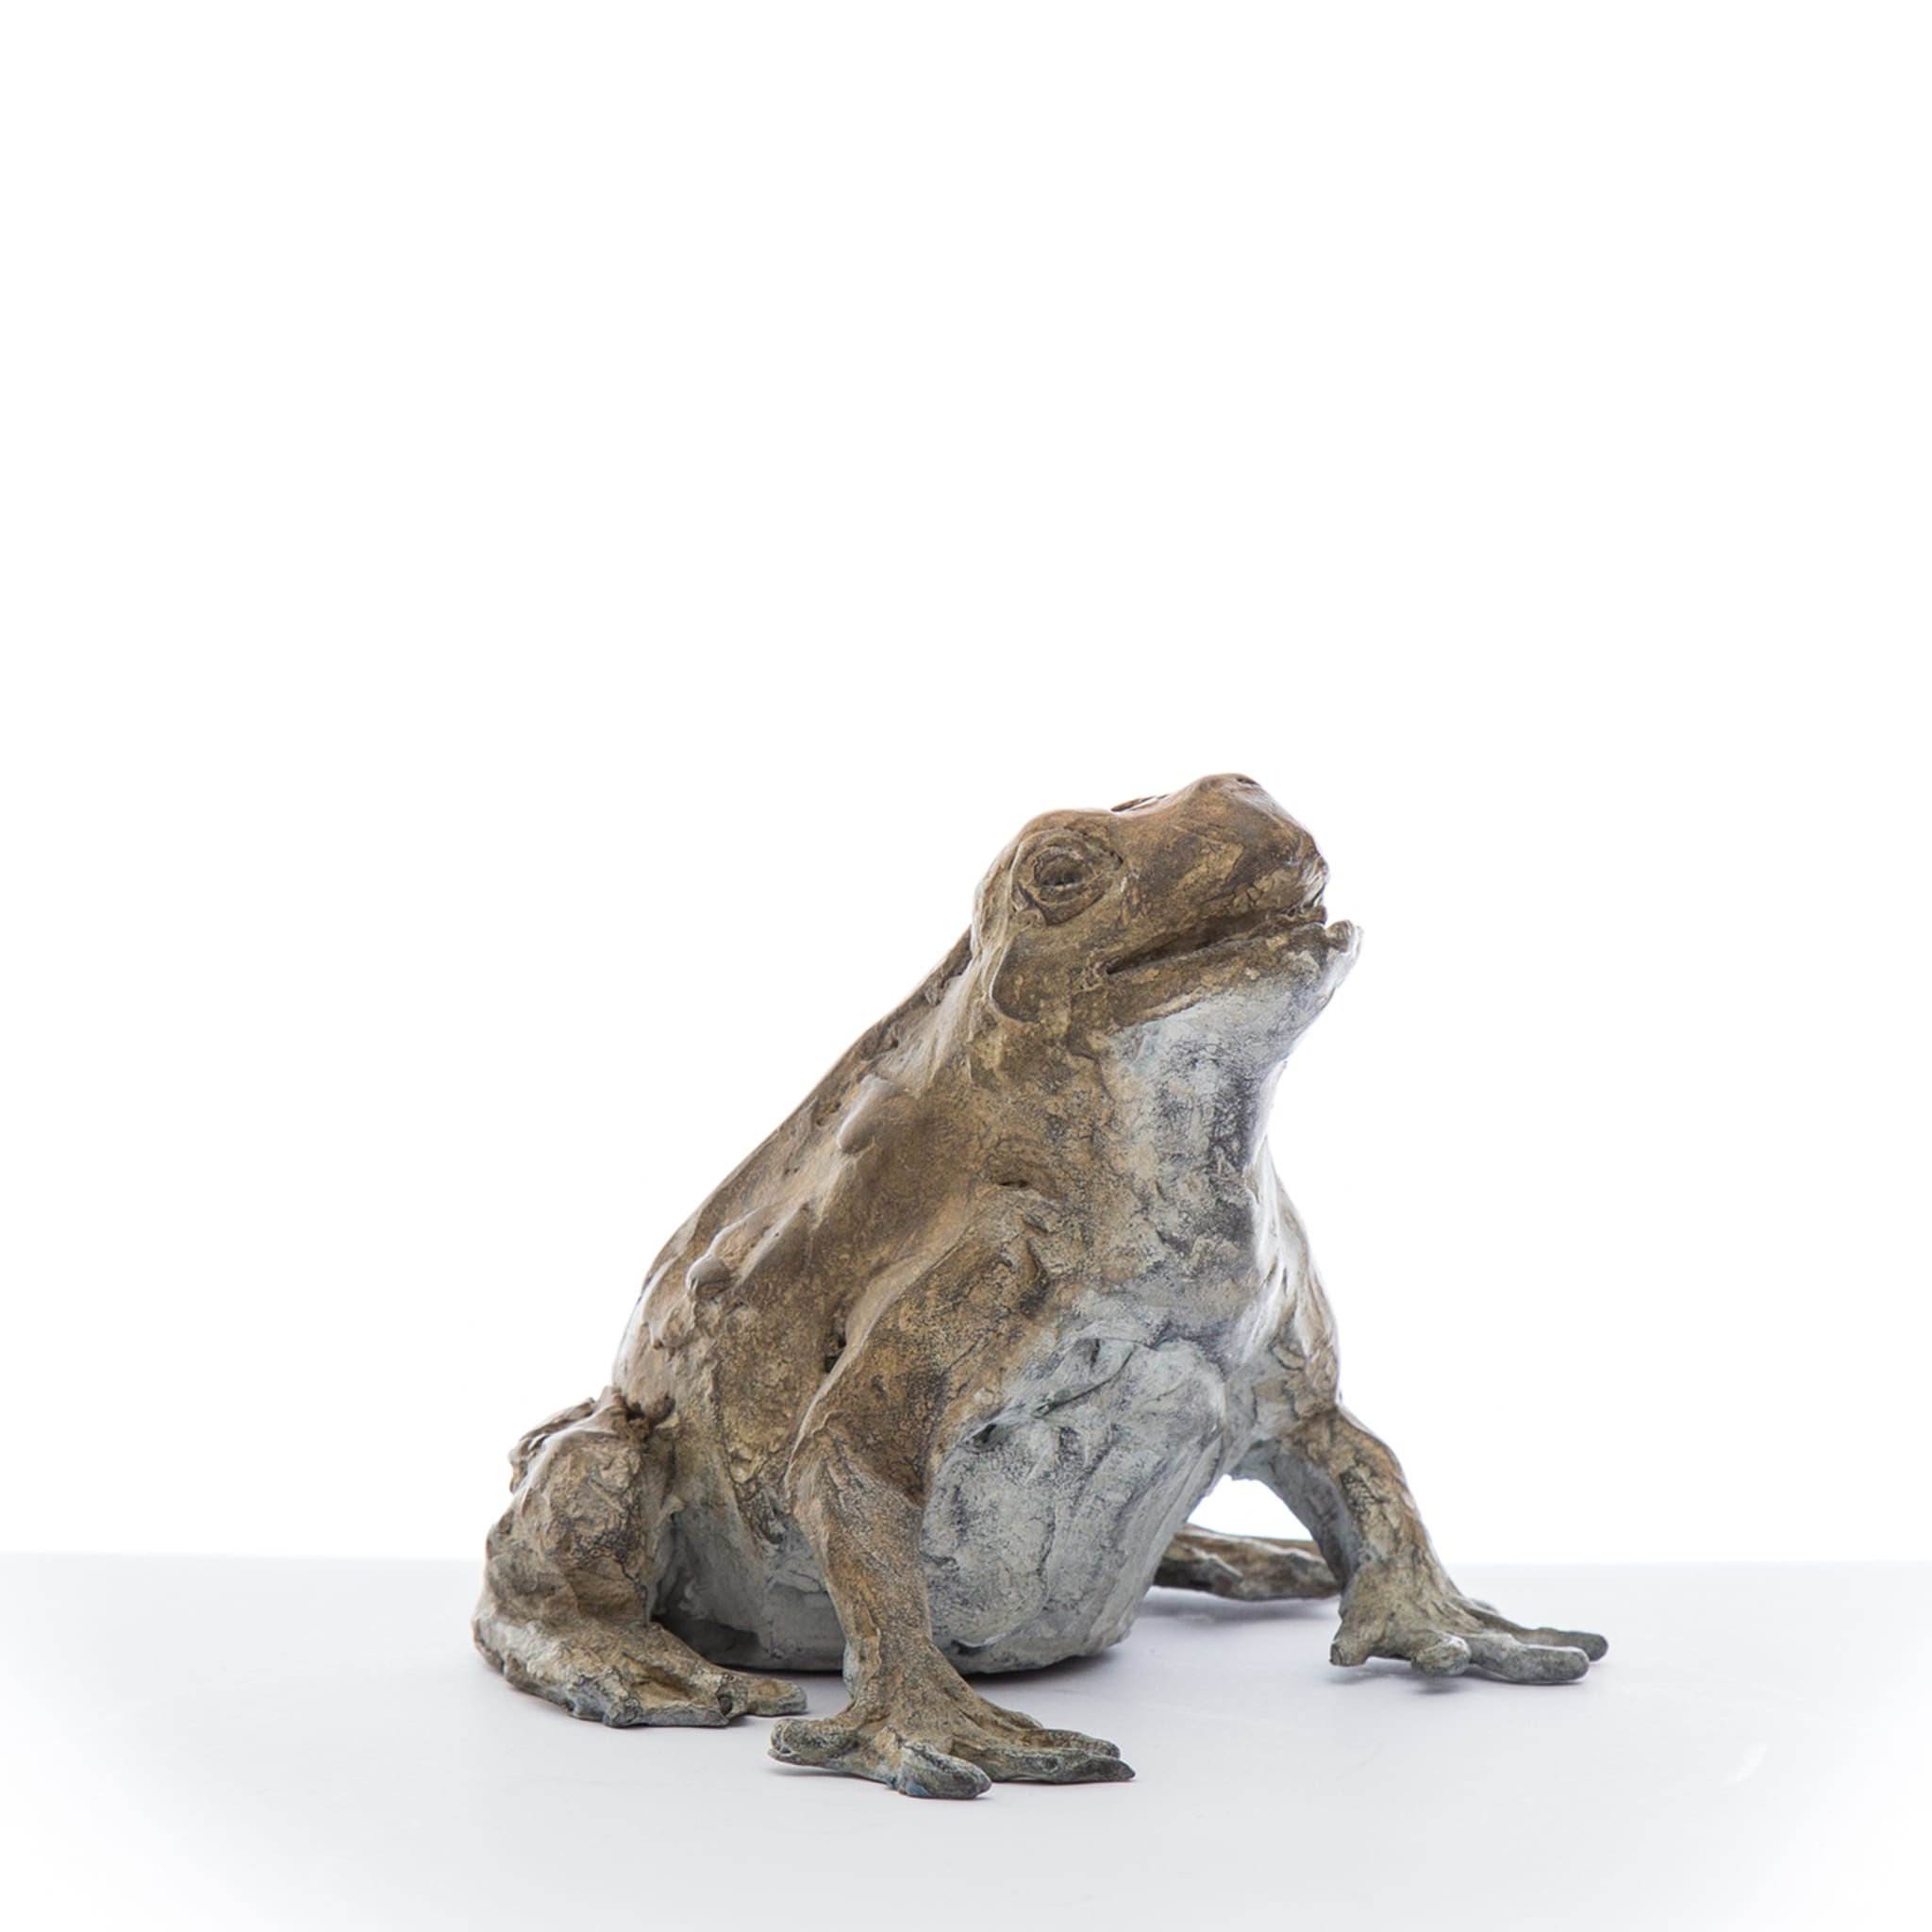 Small Frog Sculpture - Alternative view 1